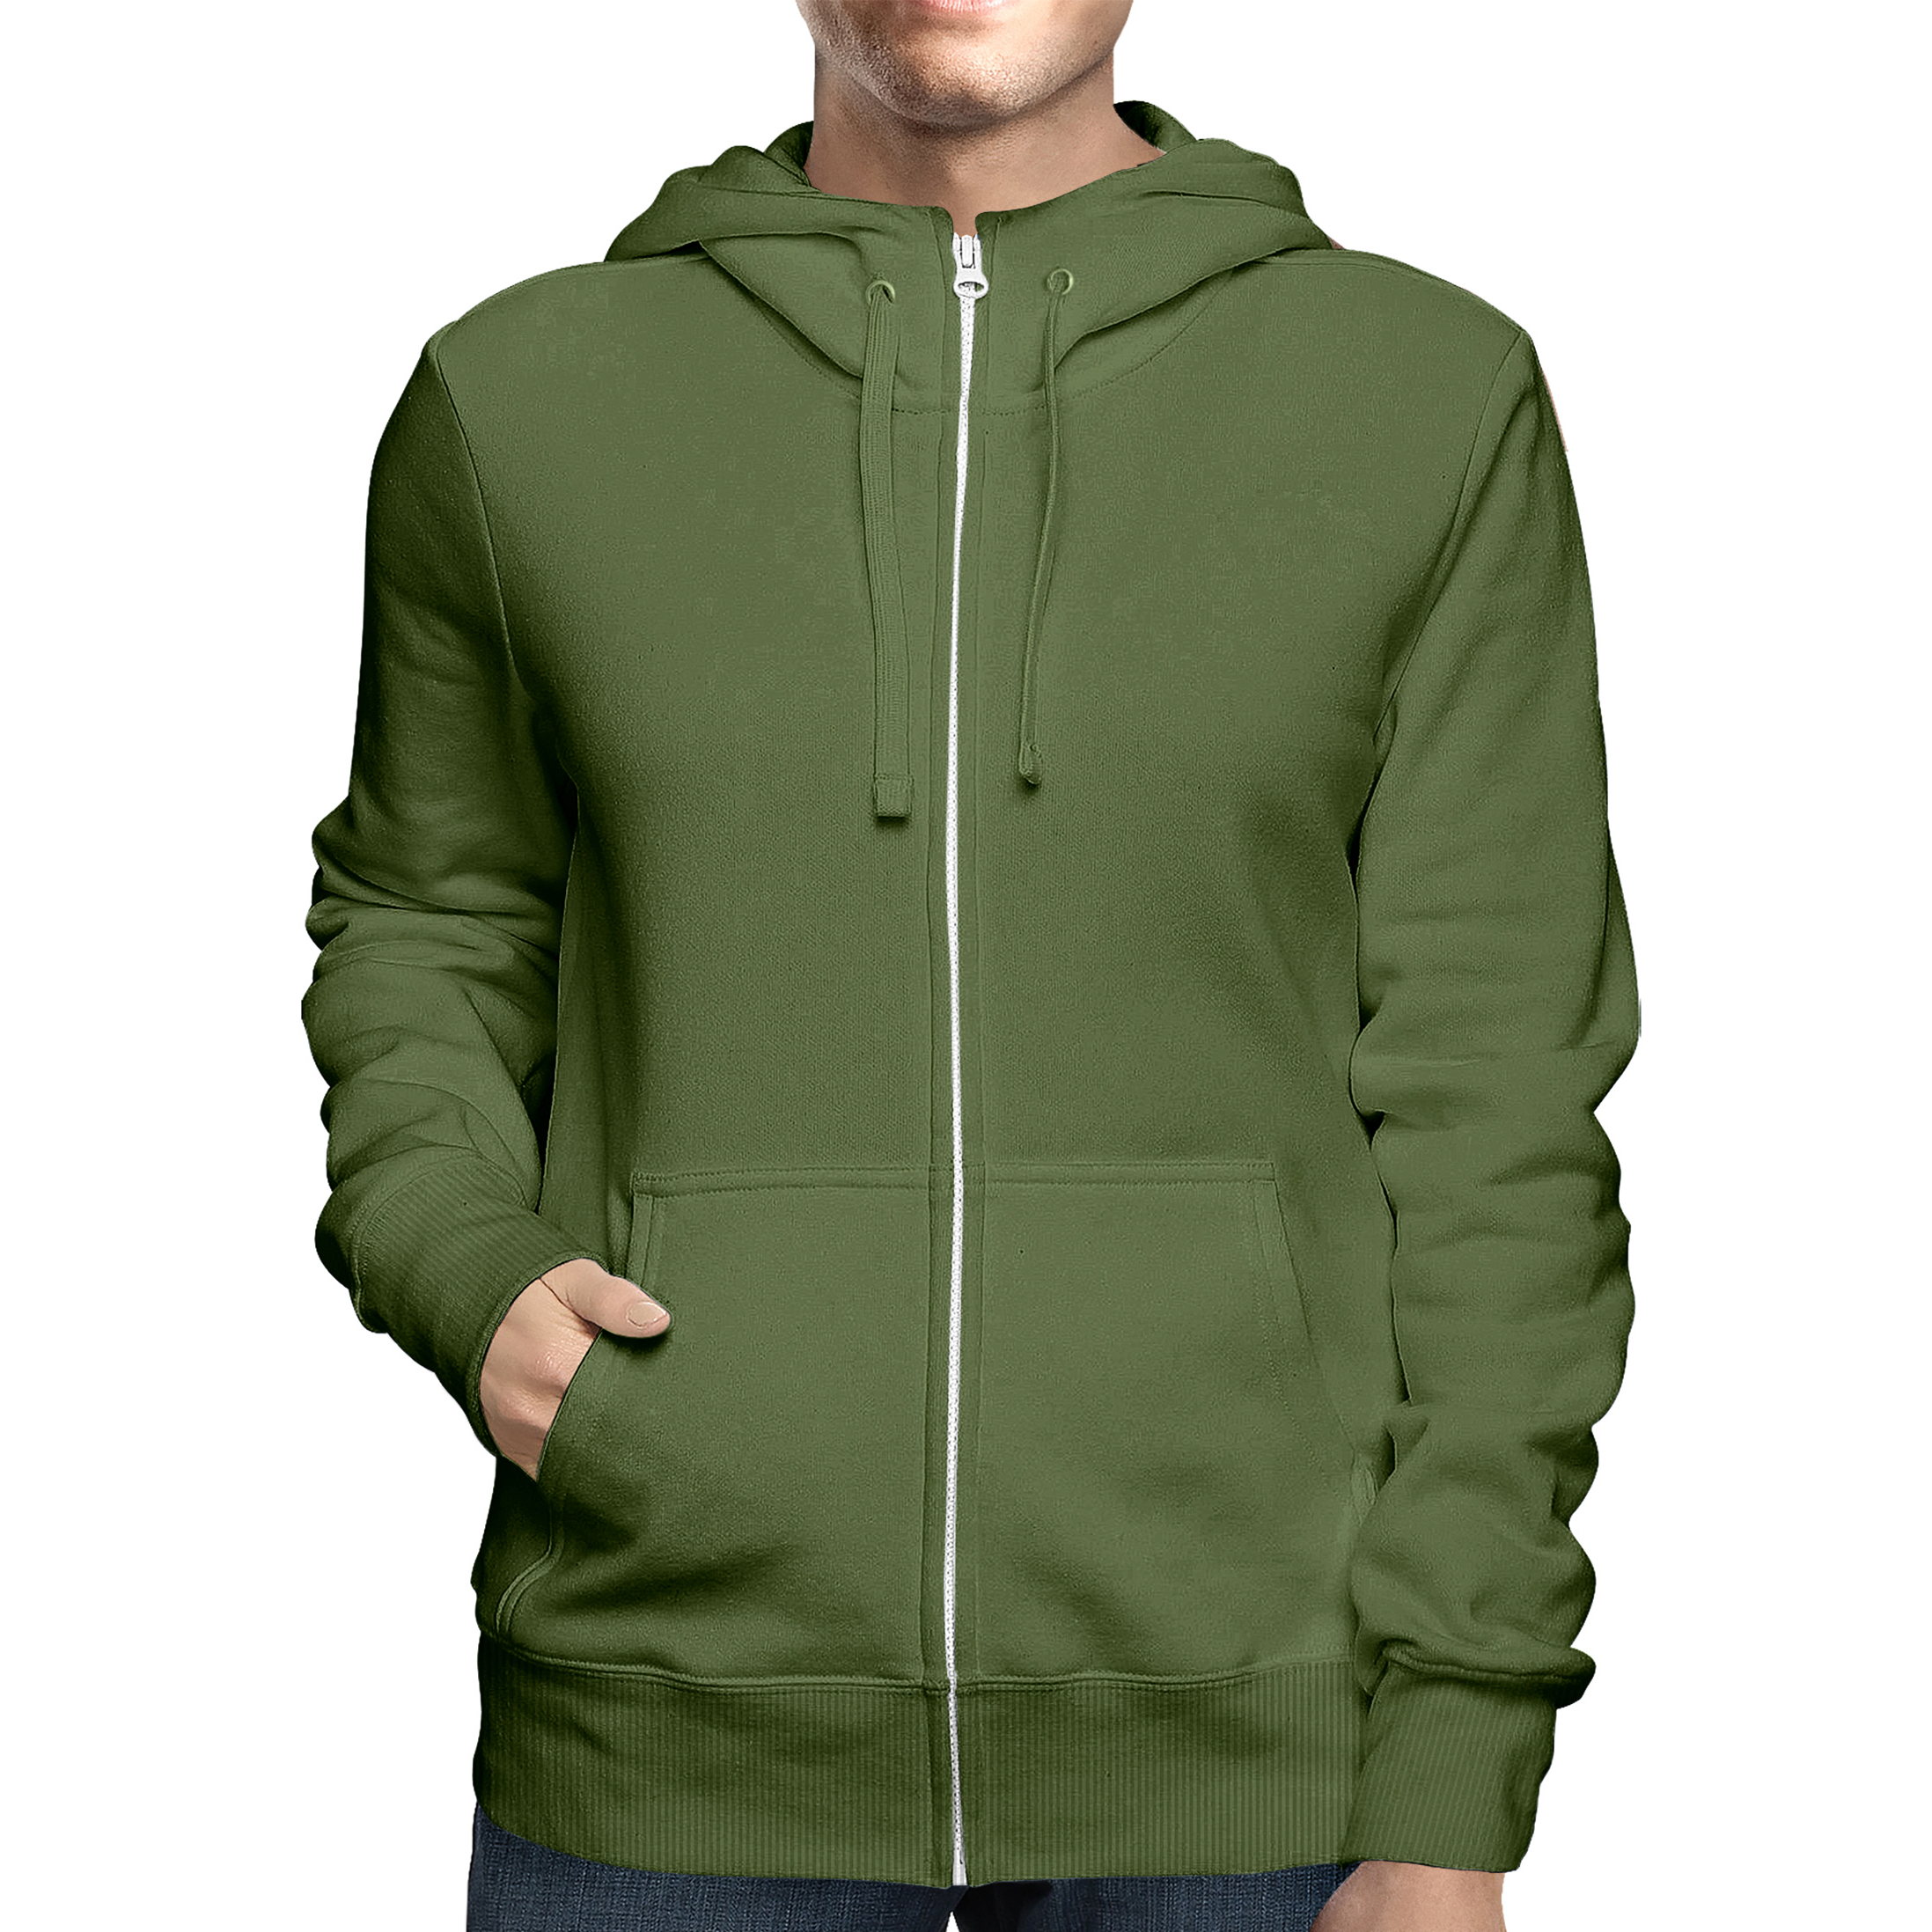 2-Pack: Men's Full Zip Up Fleece-Lined Hoodie Sweatshirt (Big & Tall Size Available) - Olive, 2x-large